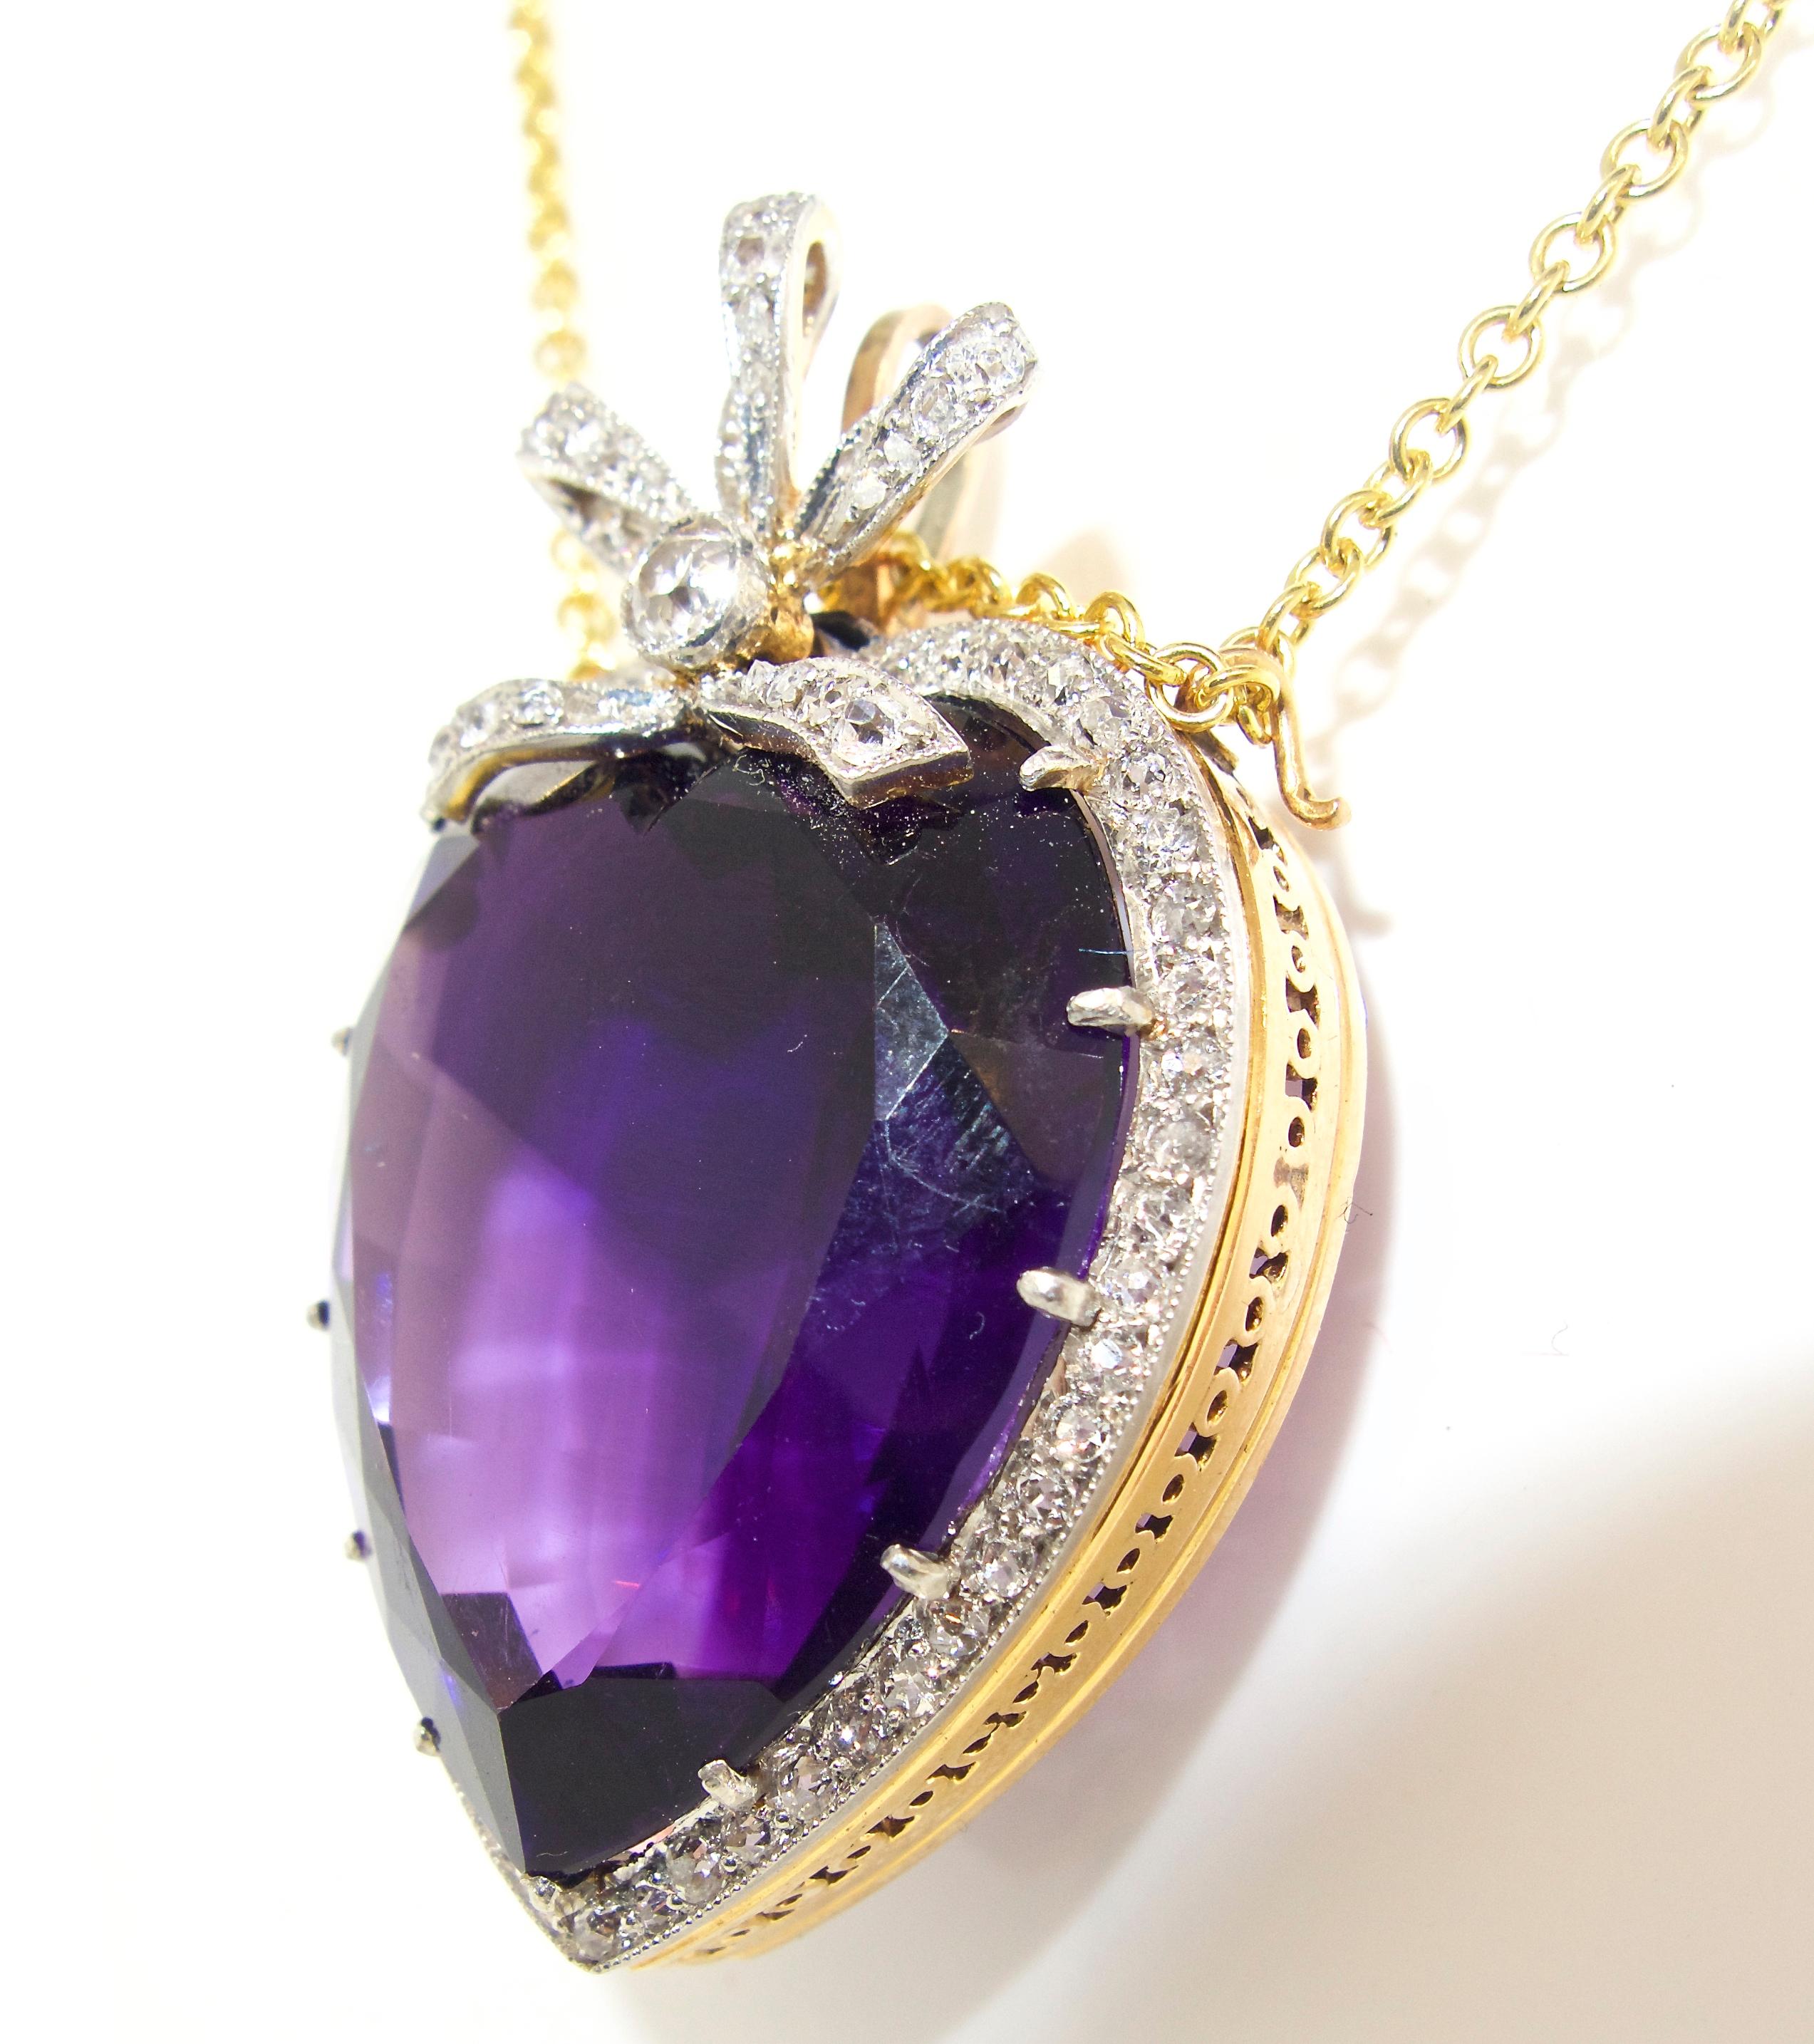 The center deep violet purple amethyst is from the Siberian area of Russian, it weighs 20 cts., approximately.  This center heart shaped stone is surrounded and accented by 80 old cut white diamonds.  This pin/pendant is suspended on a gold chain